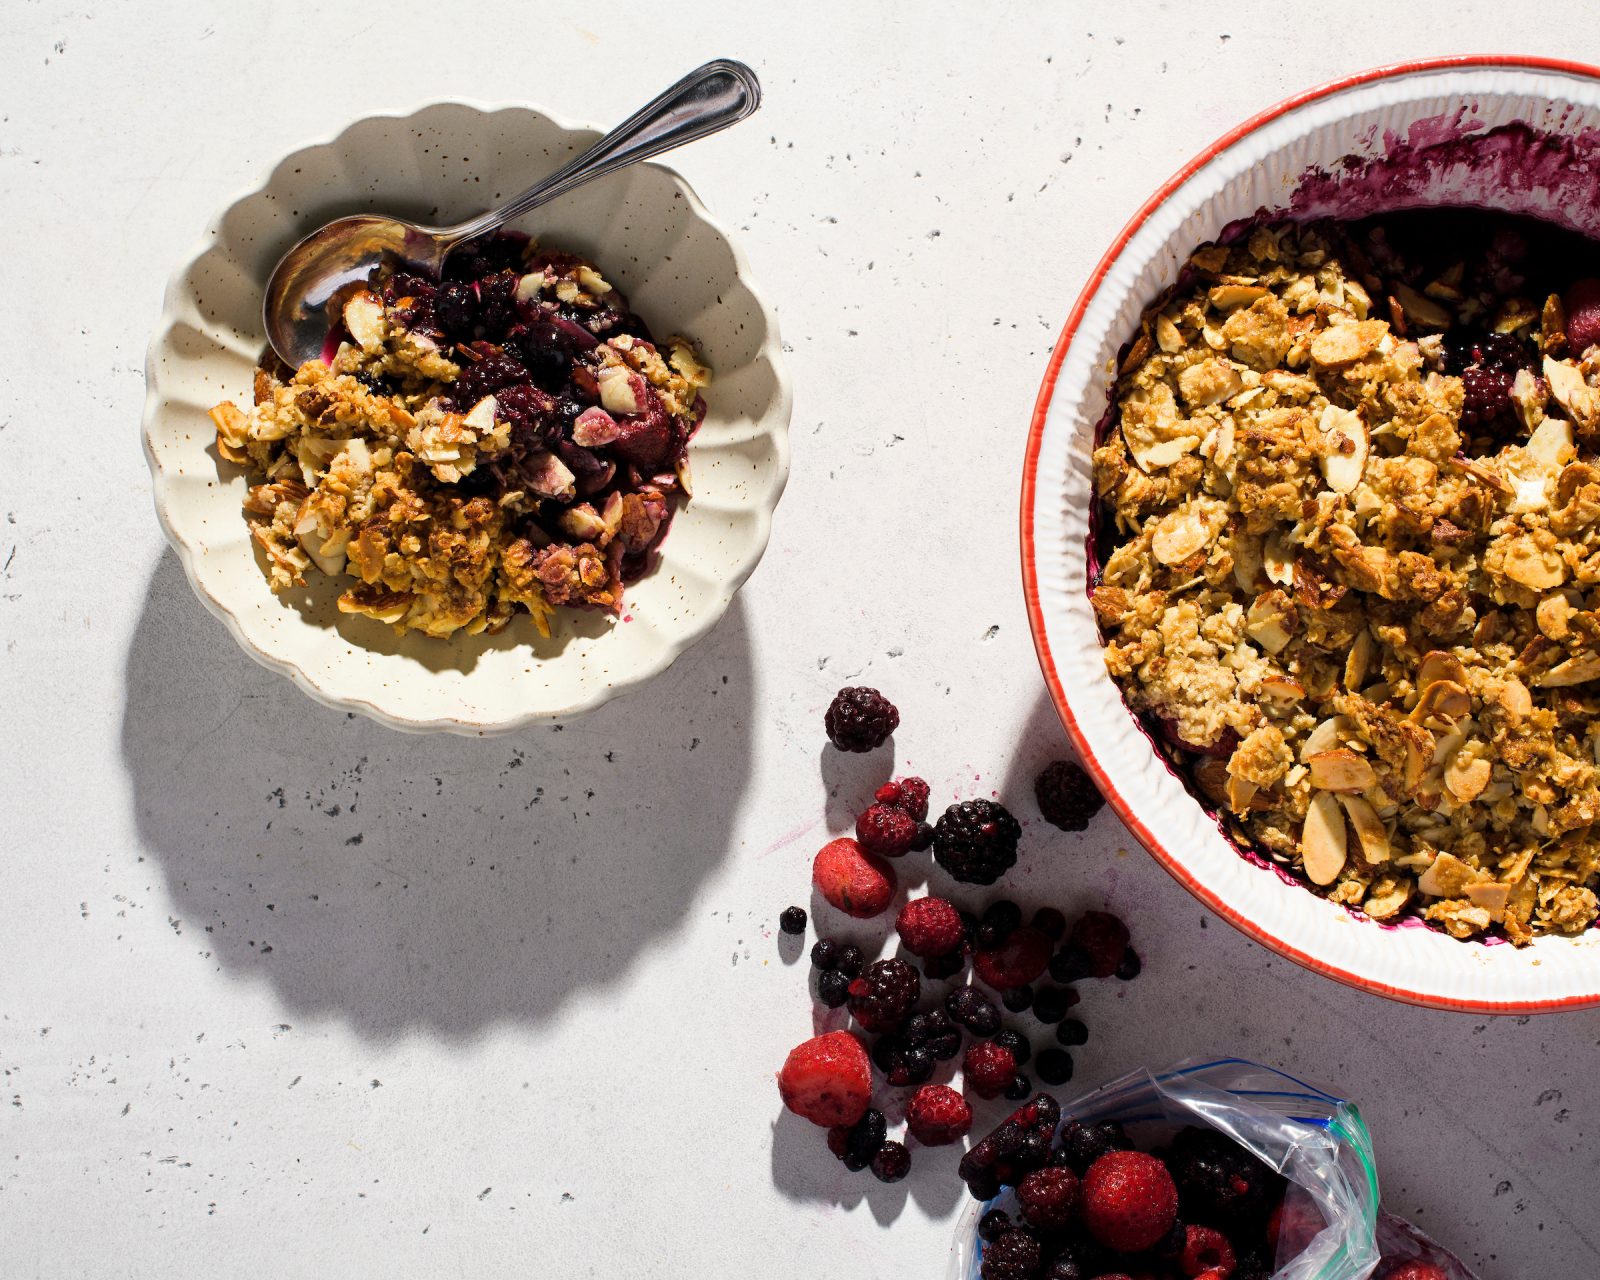 Mixed Berry Crumble Spiced Oats Almonds Cook What You Have Milk Street